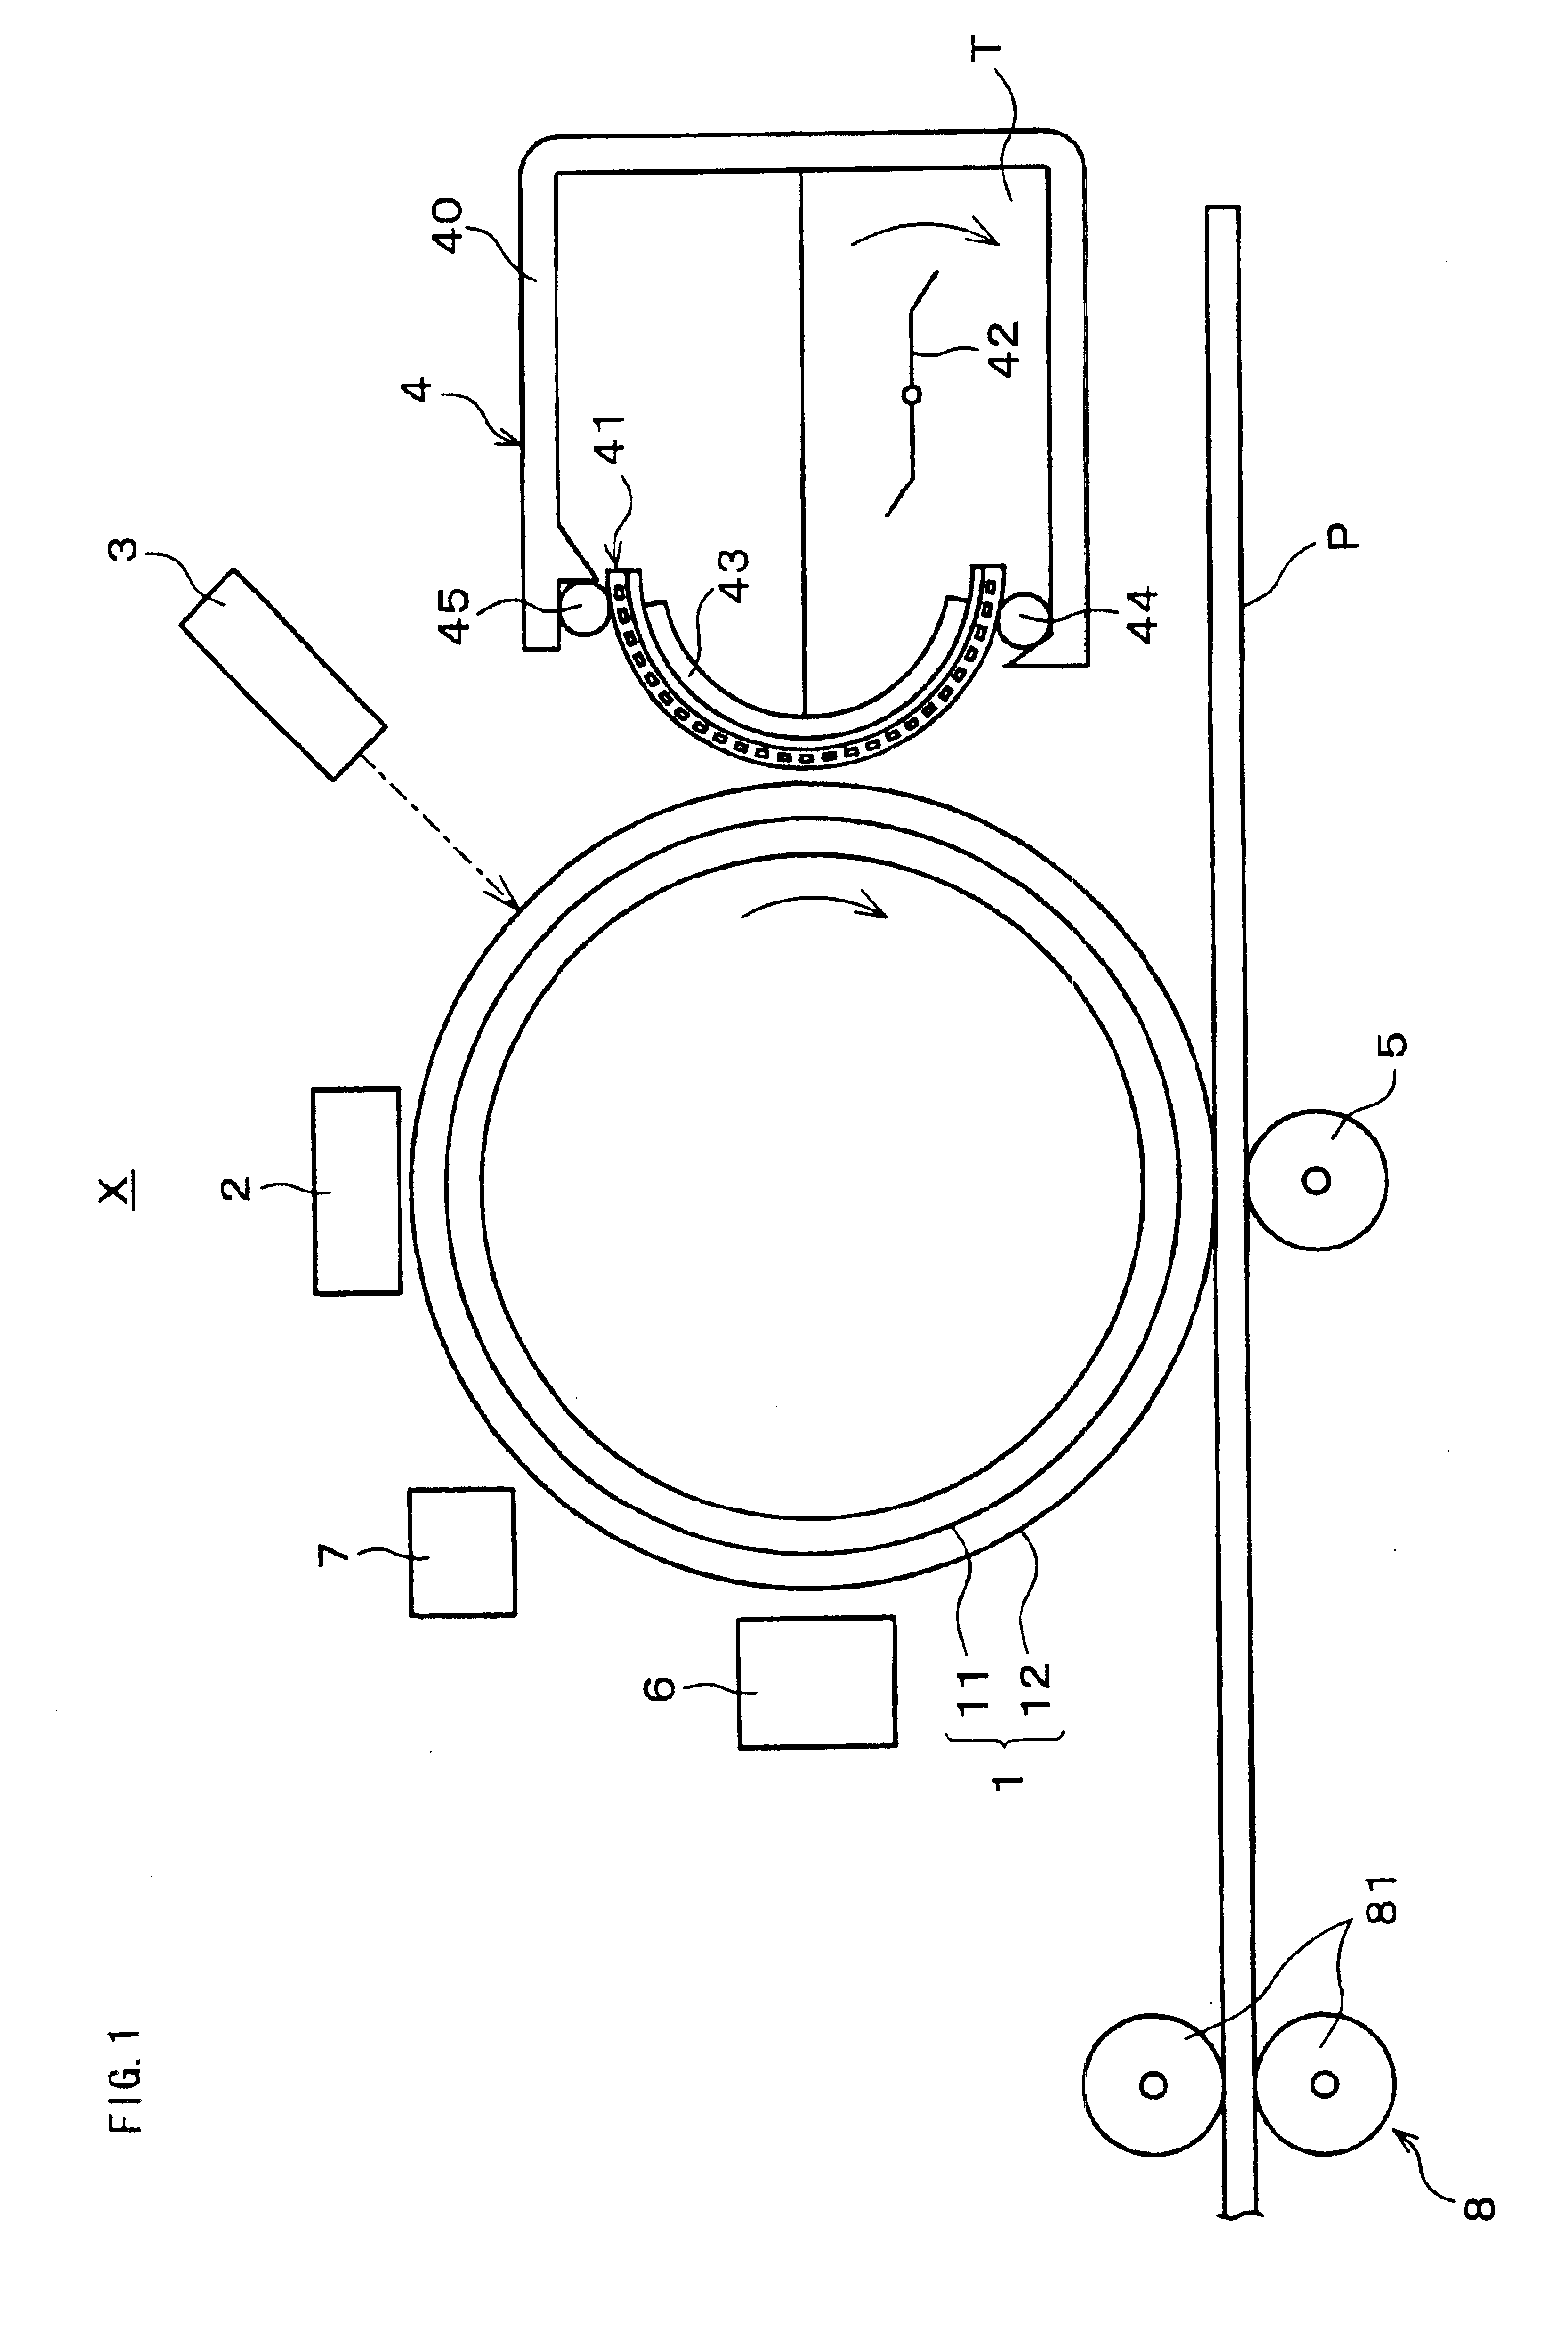 Developing device conveying toner using a traveling-wave electric field and image forming apparatus using same